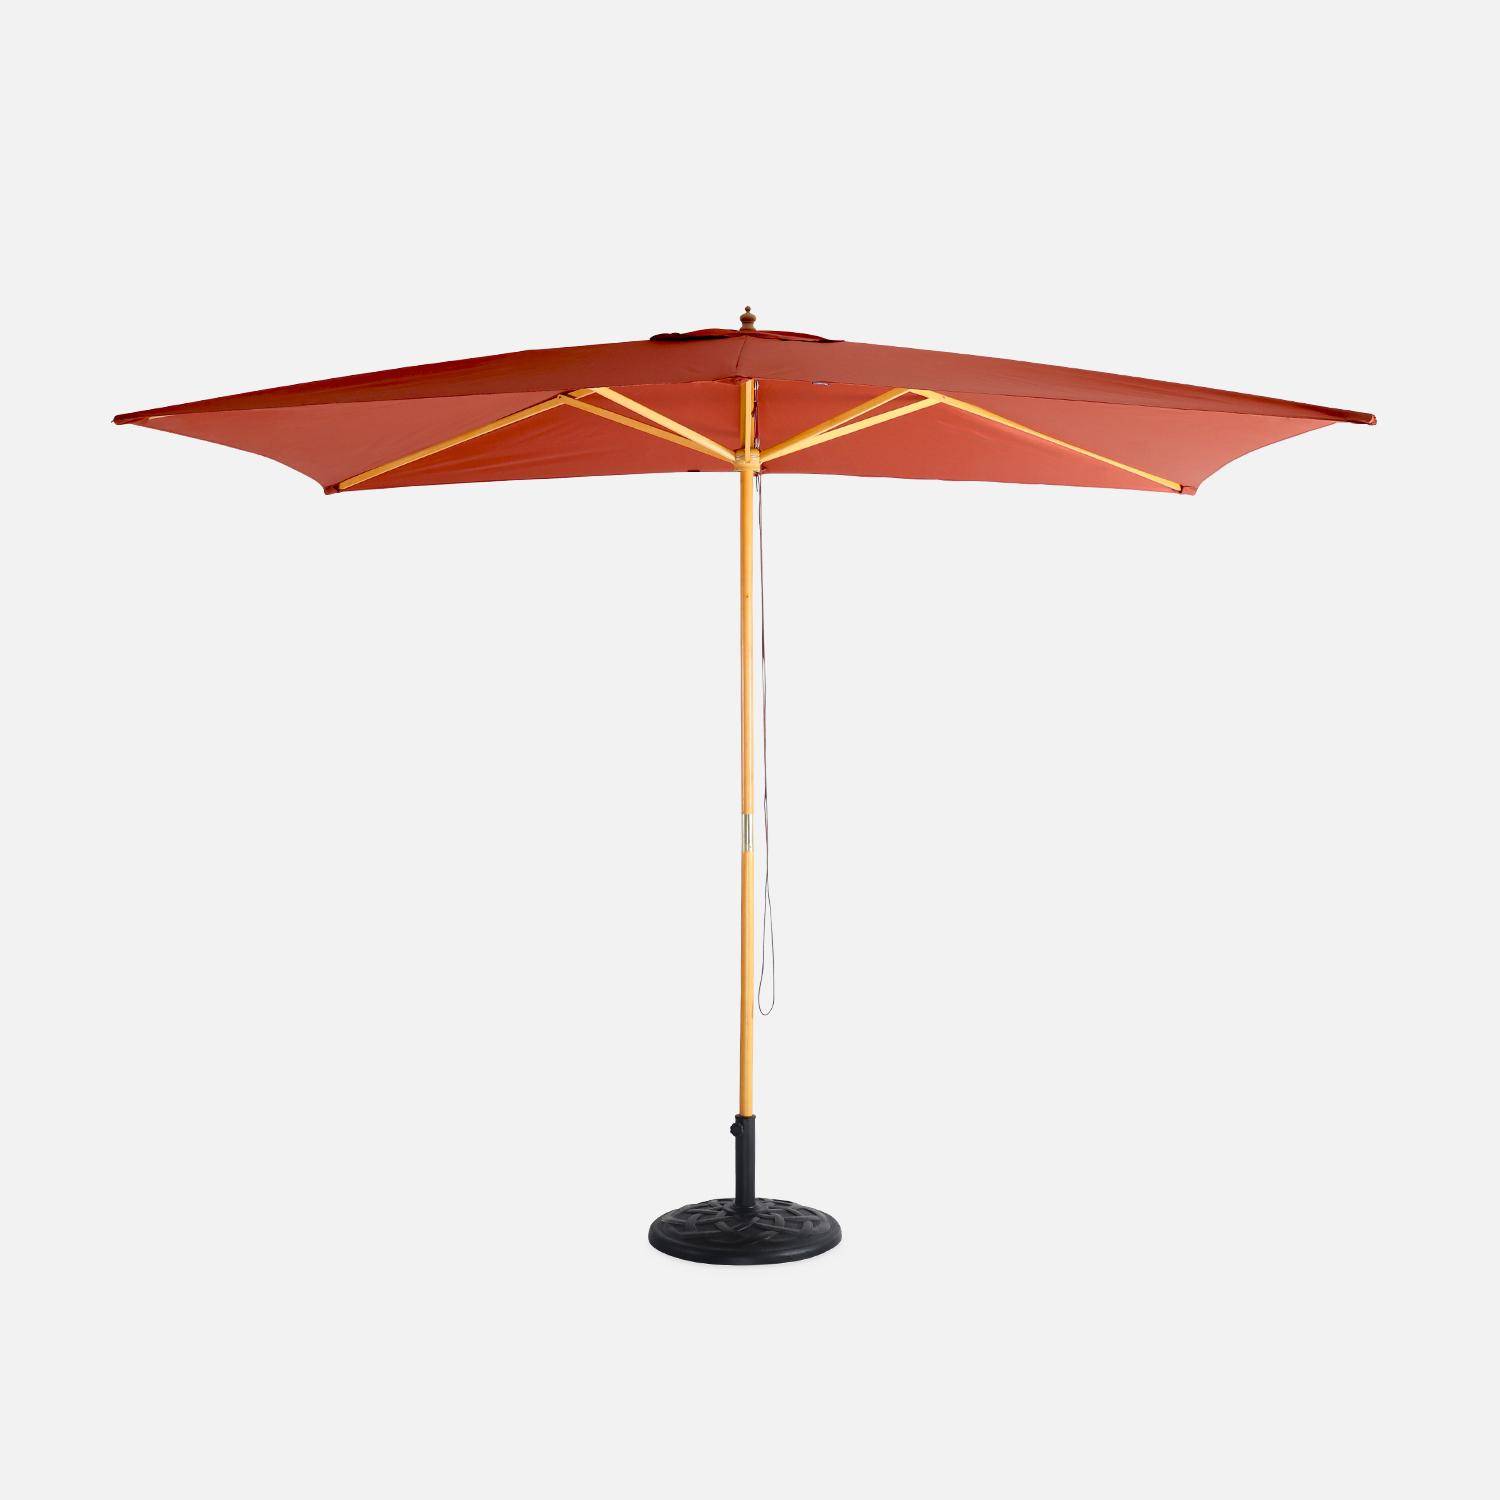 Straight rectangular wooden parasol 2x3m - adjustable central mast in wood and hand pulley opening - Cabourg - Terracotta Photo2